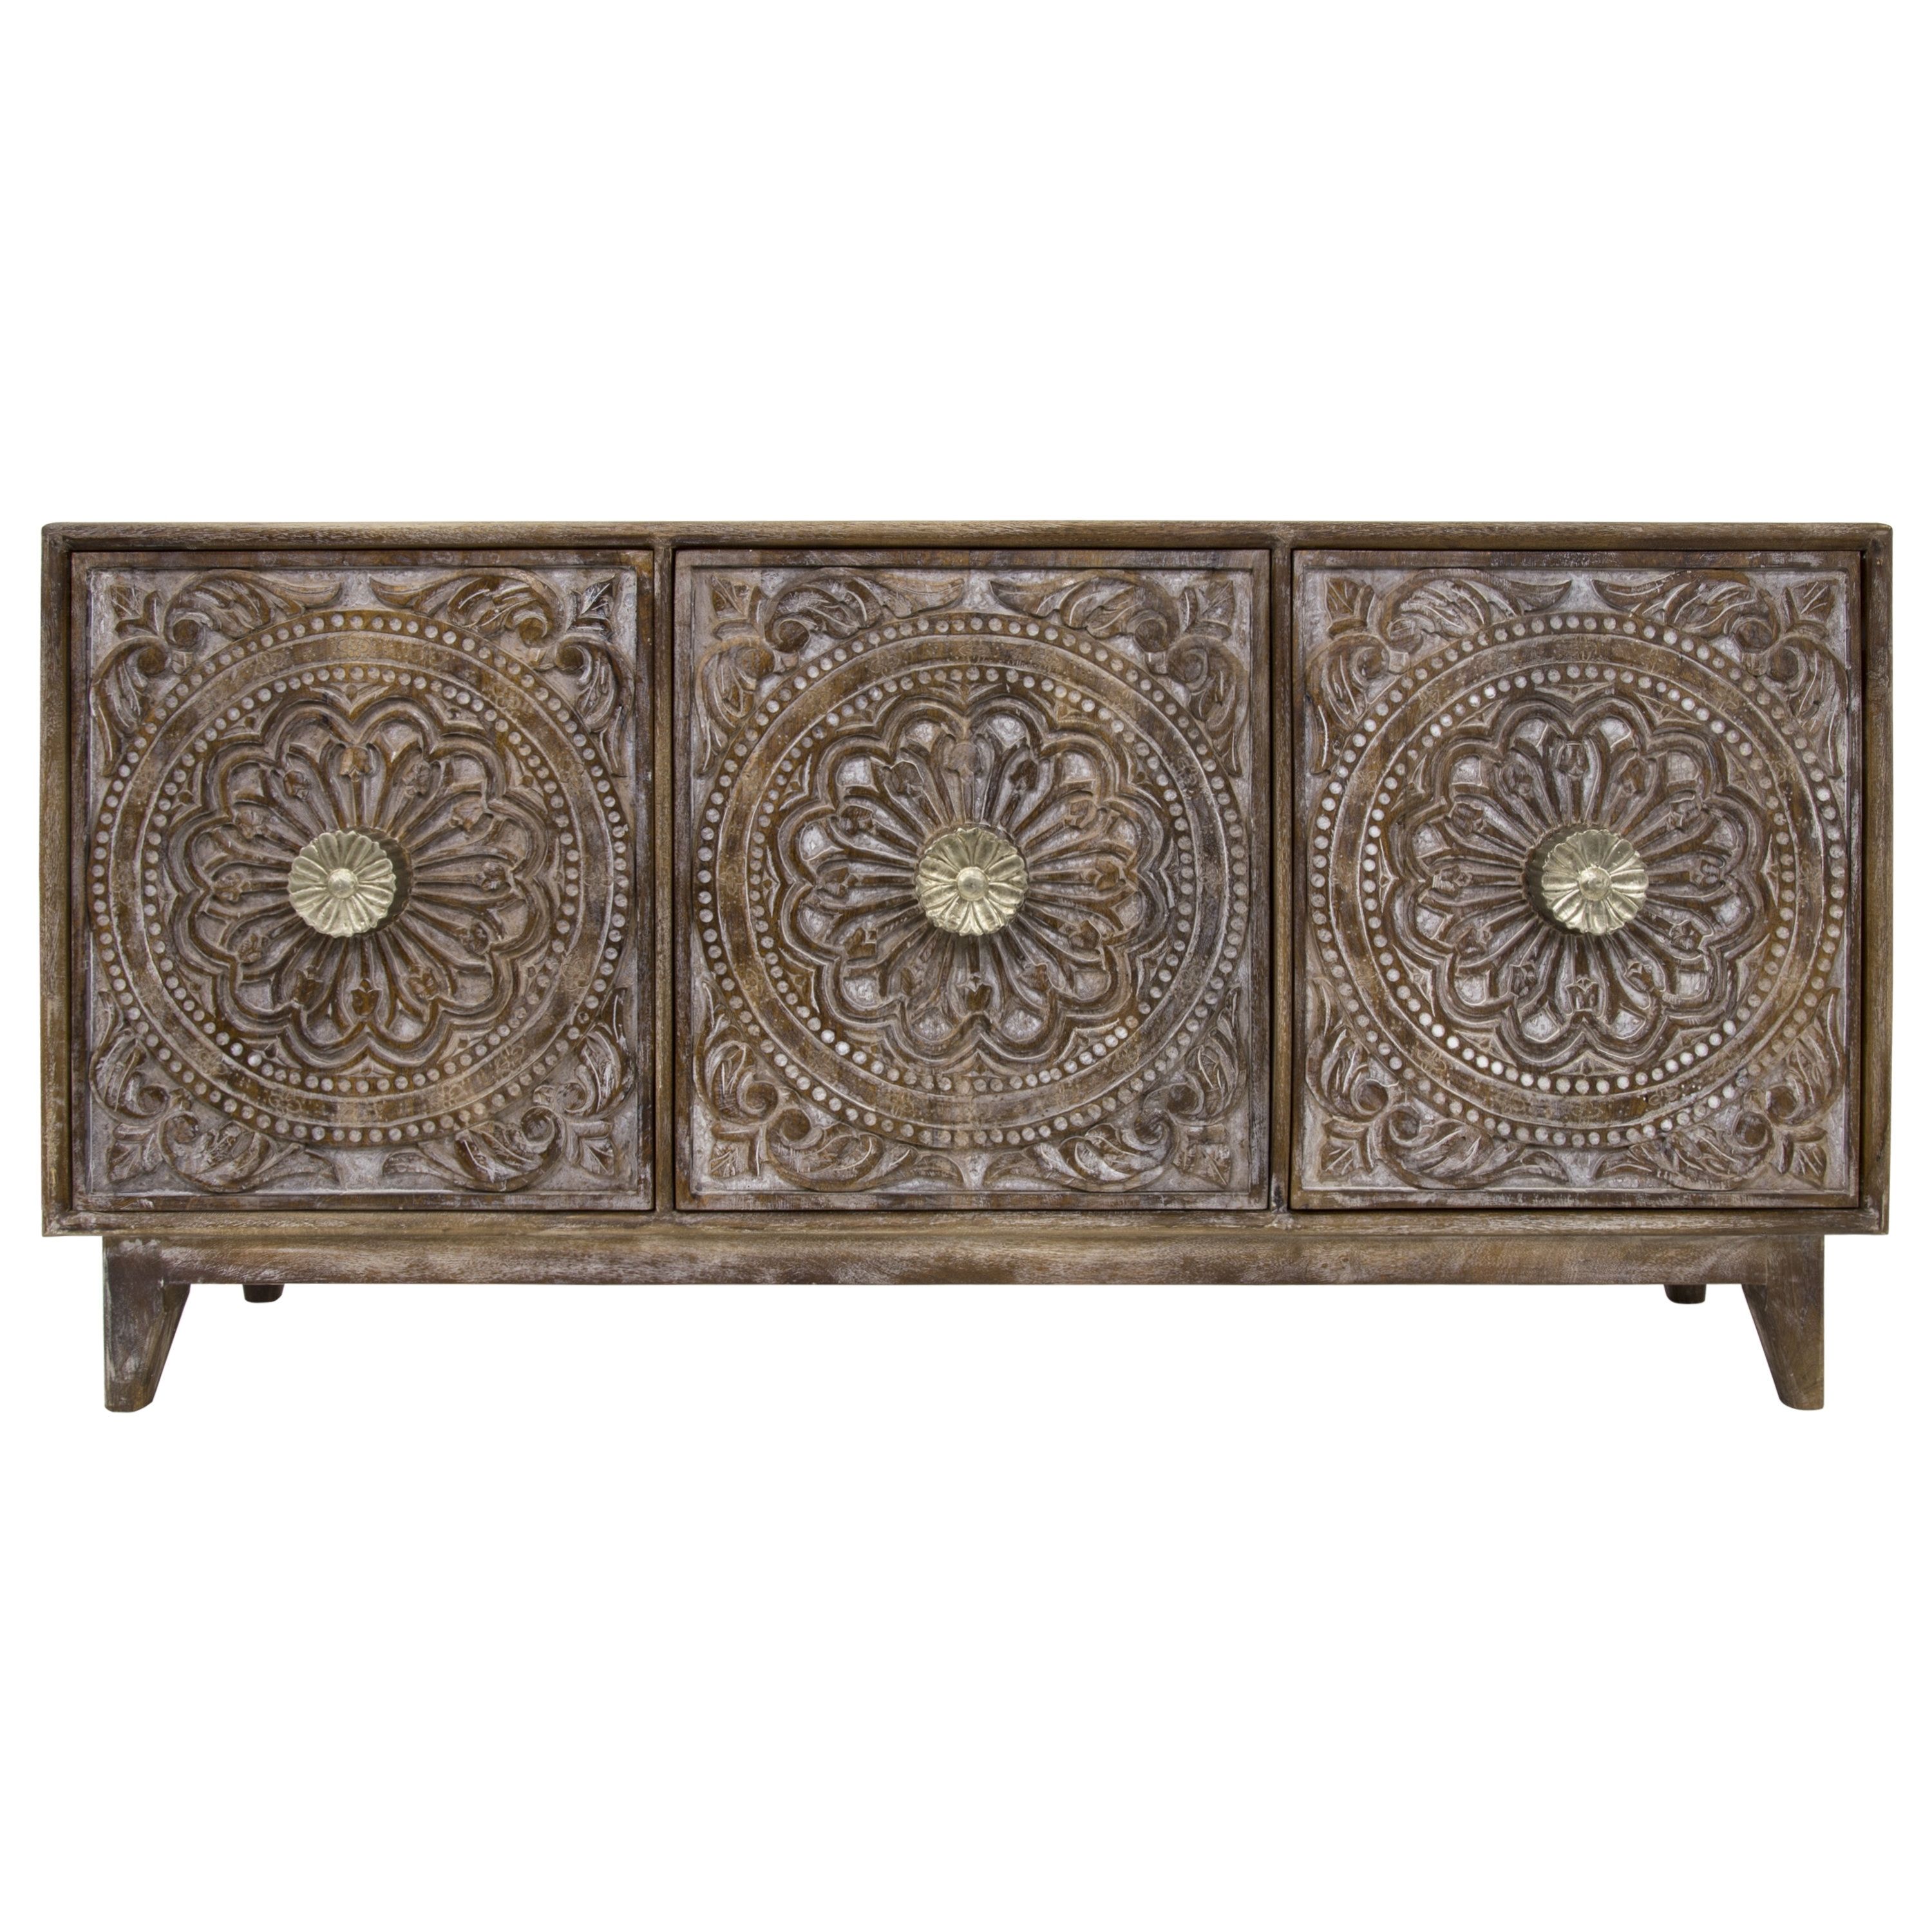 Bungalow Rose Rausch Hand Carved 3 Door Accent Chest | Wayfair With Regard To Most Up To Date Carved 4 Door Metal Frame Sideboards (View 11 of 20)